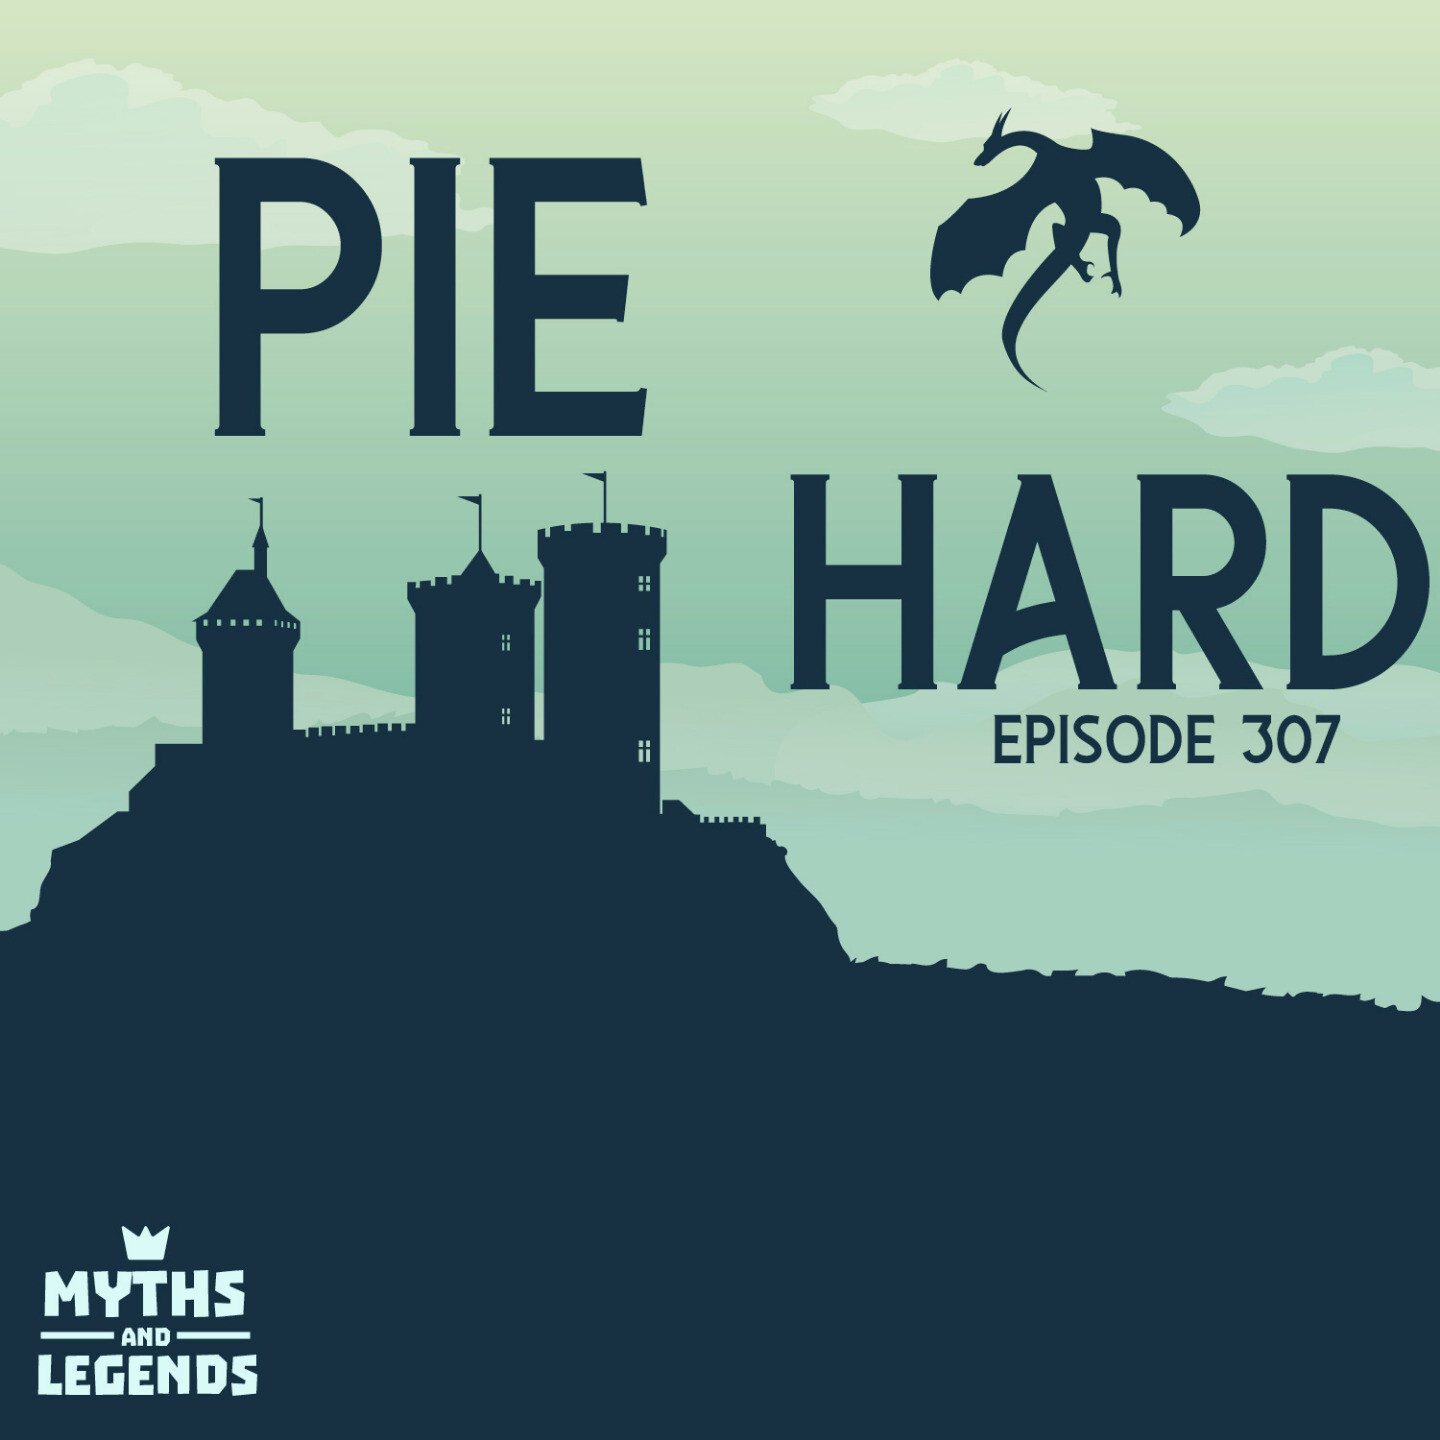 The outline of a dragon in the sky looming over the outline of a castle. The words "Pie Hard, Episode 307" are between them.